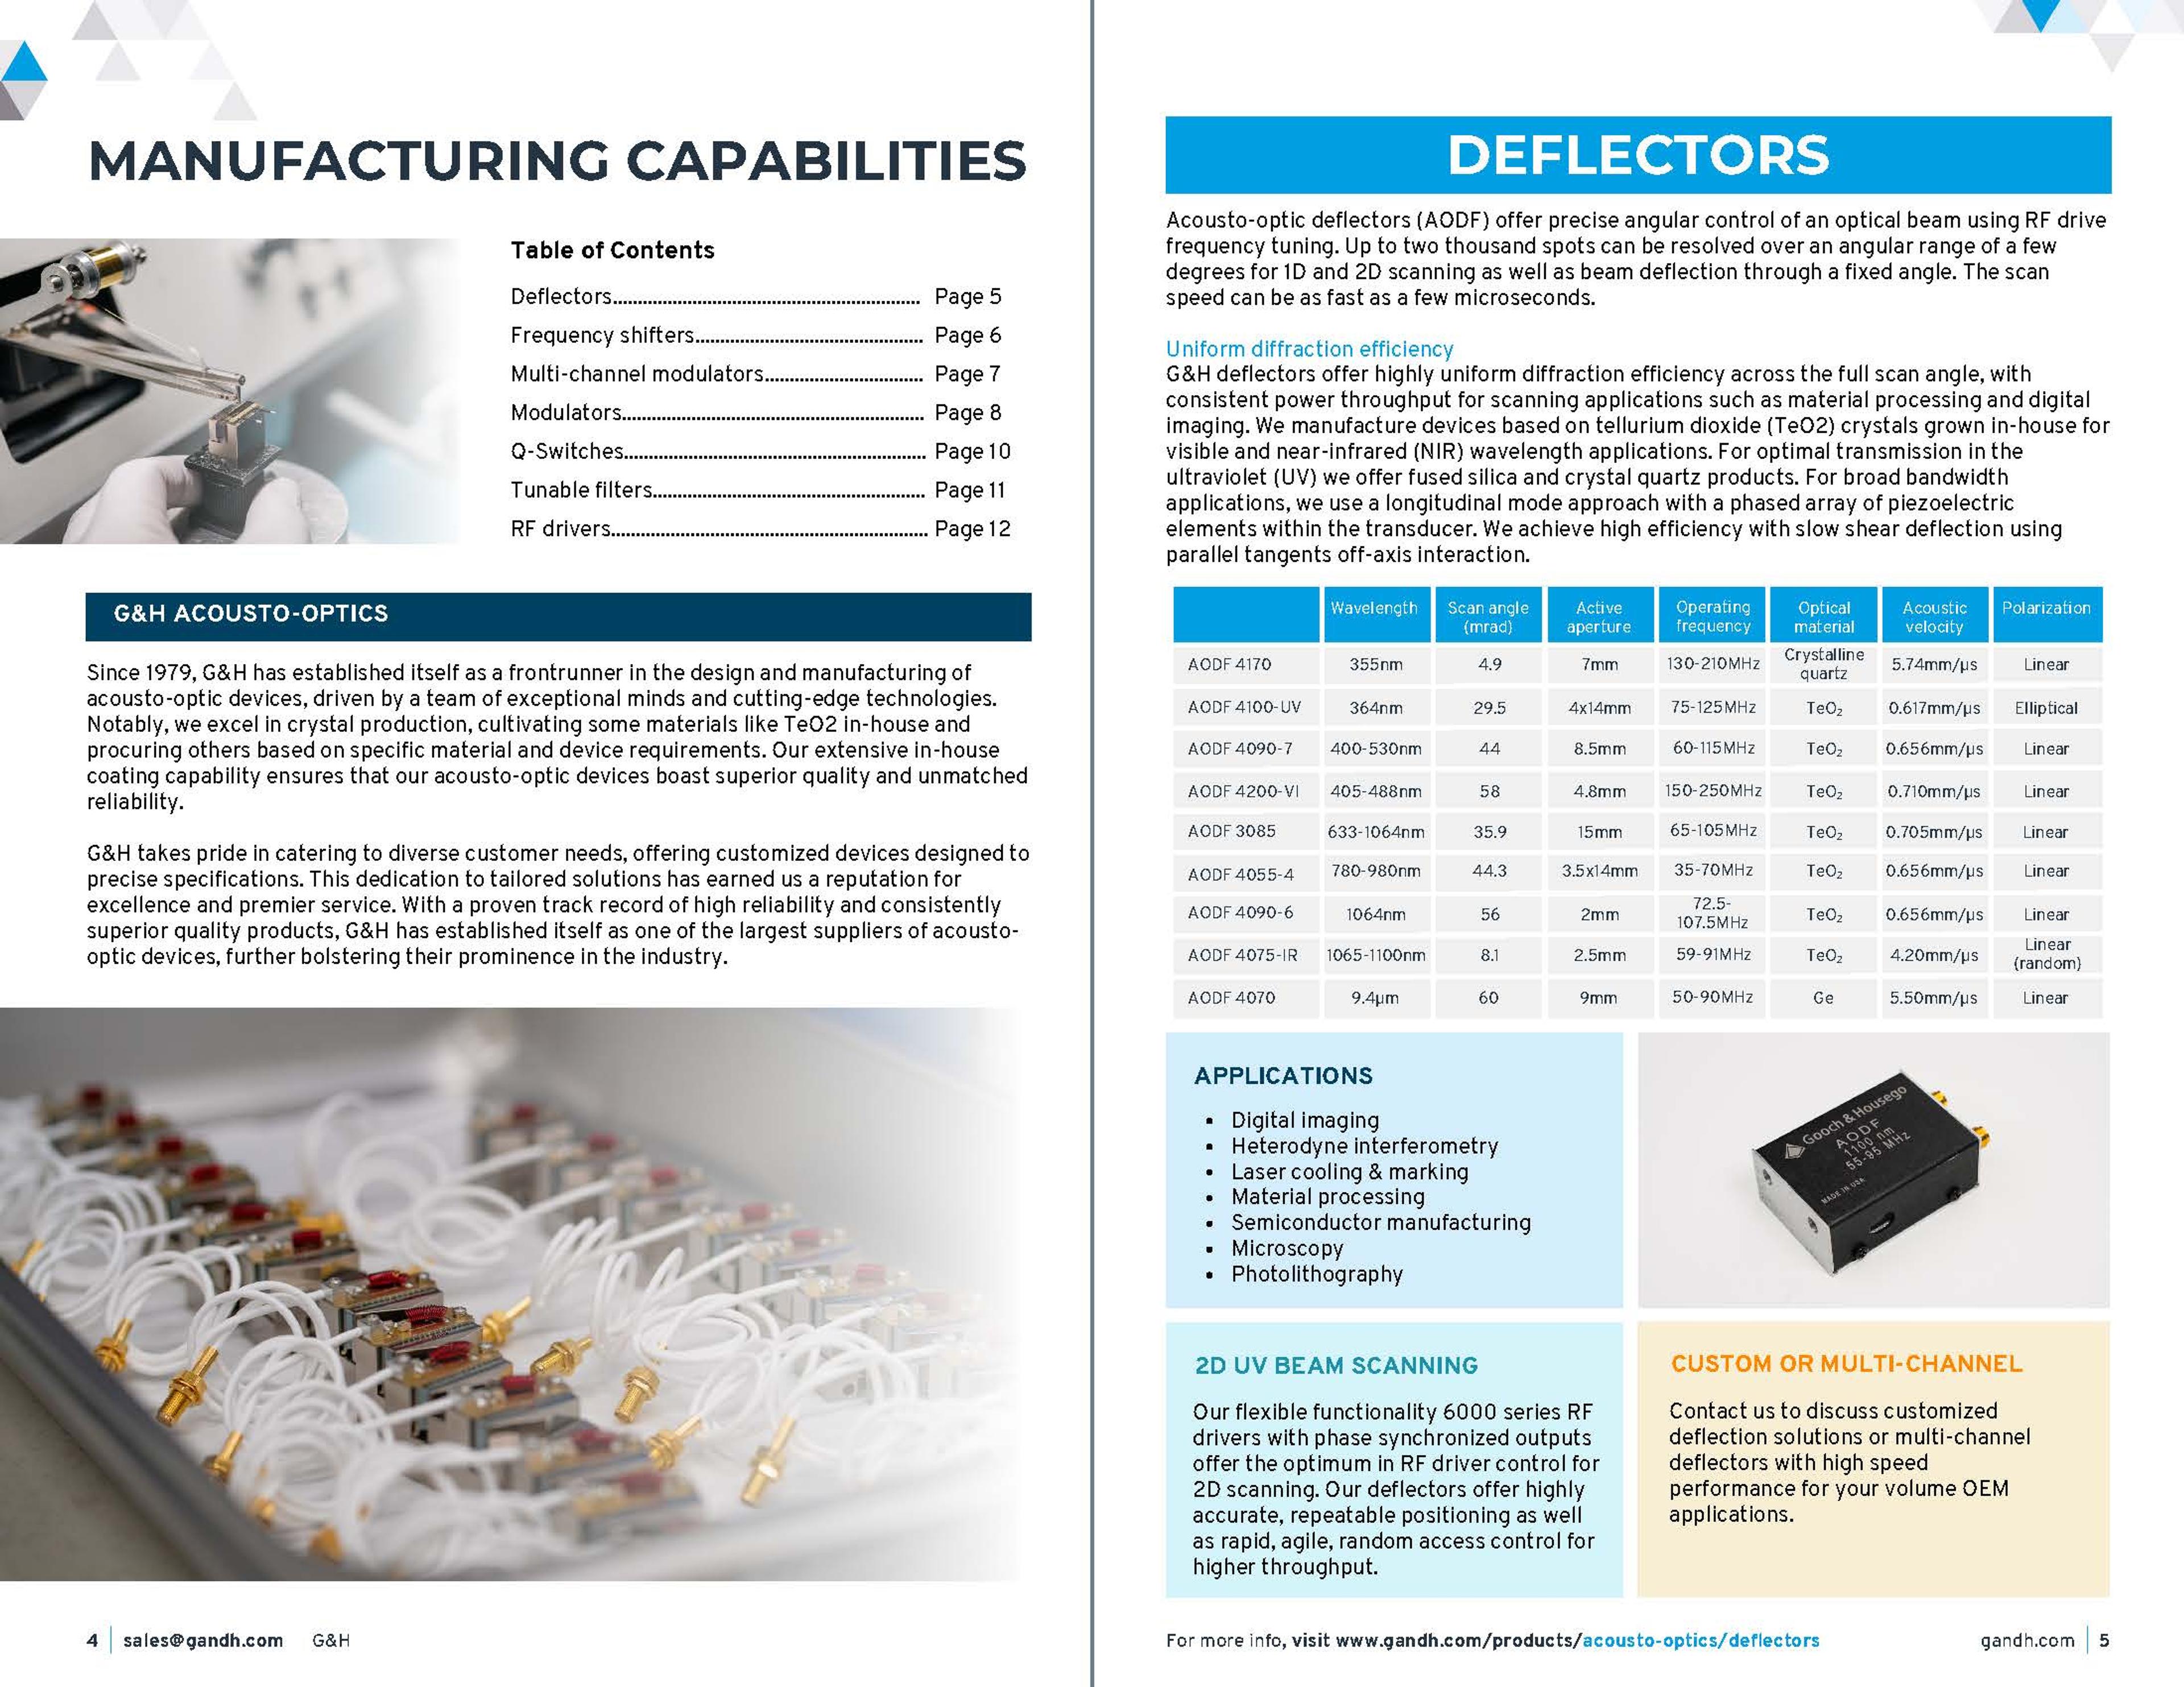 G&H Product & Solutions Guide - Acousto-Optics Page 04-05